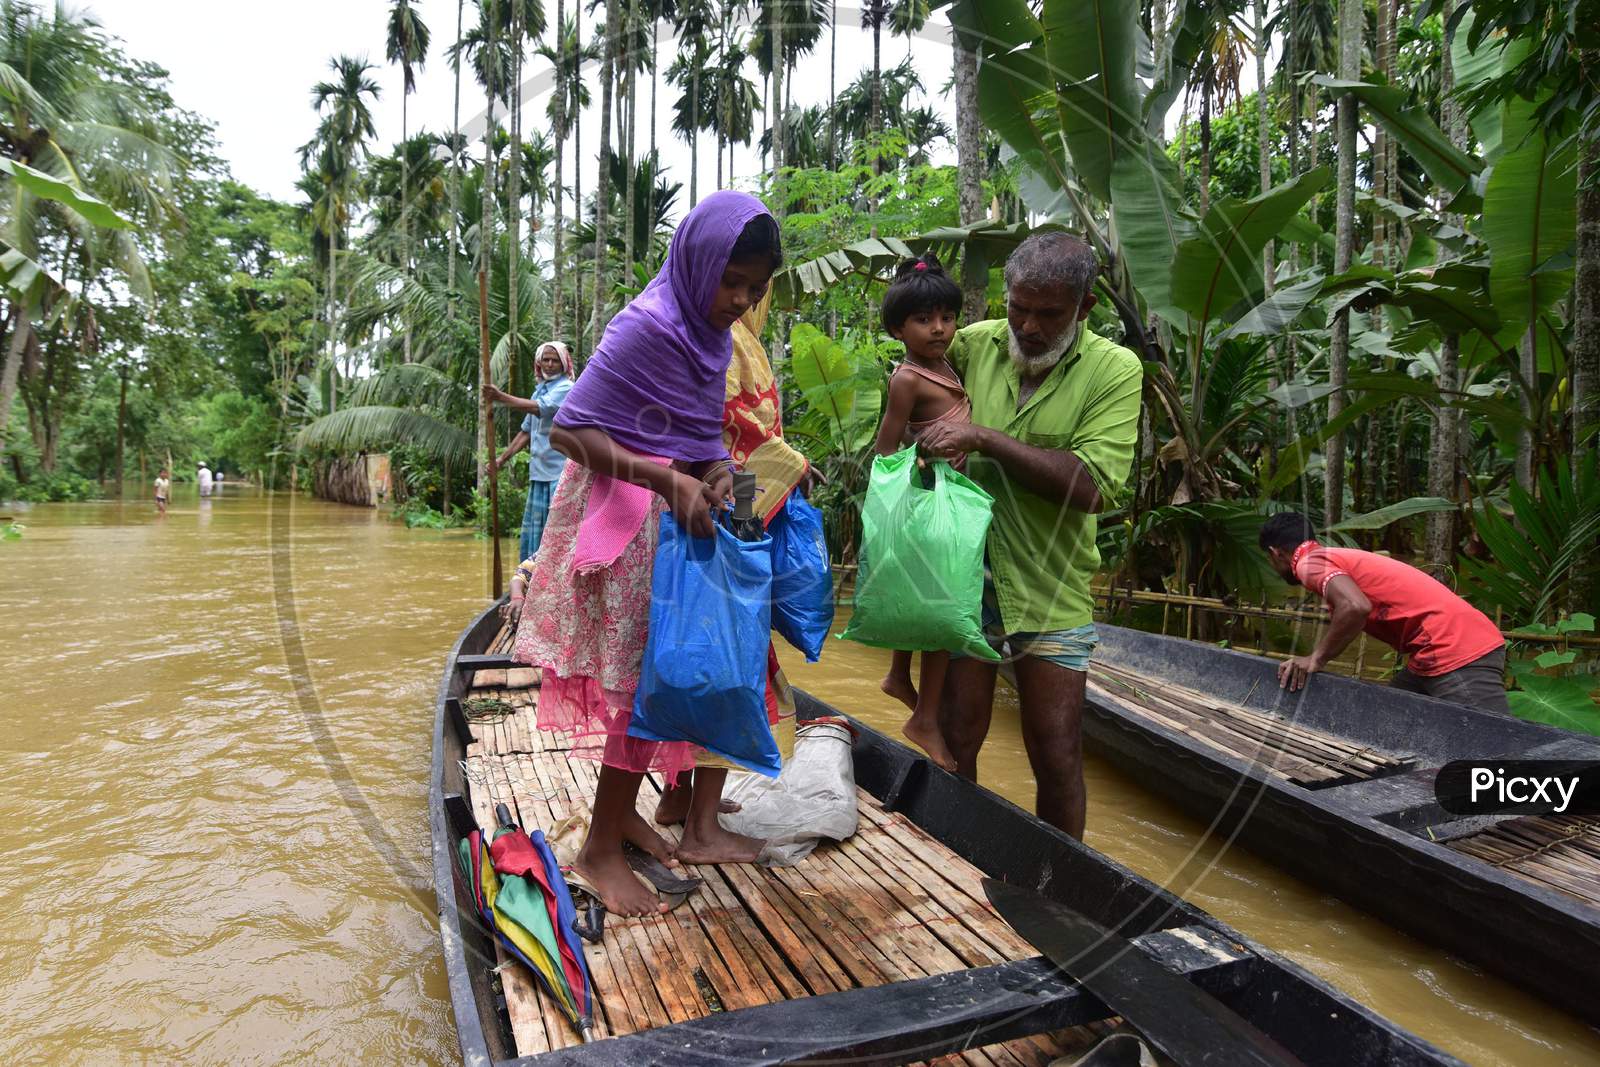 Flood Affected Villagers Arrive At A Safer Place On A Country Boat At  Bakulguri Village Near Kampur In Nagaon District Of Assam On May 27,2020.